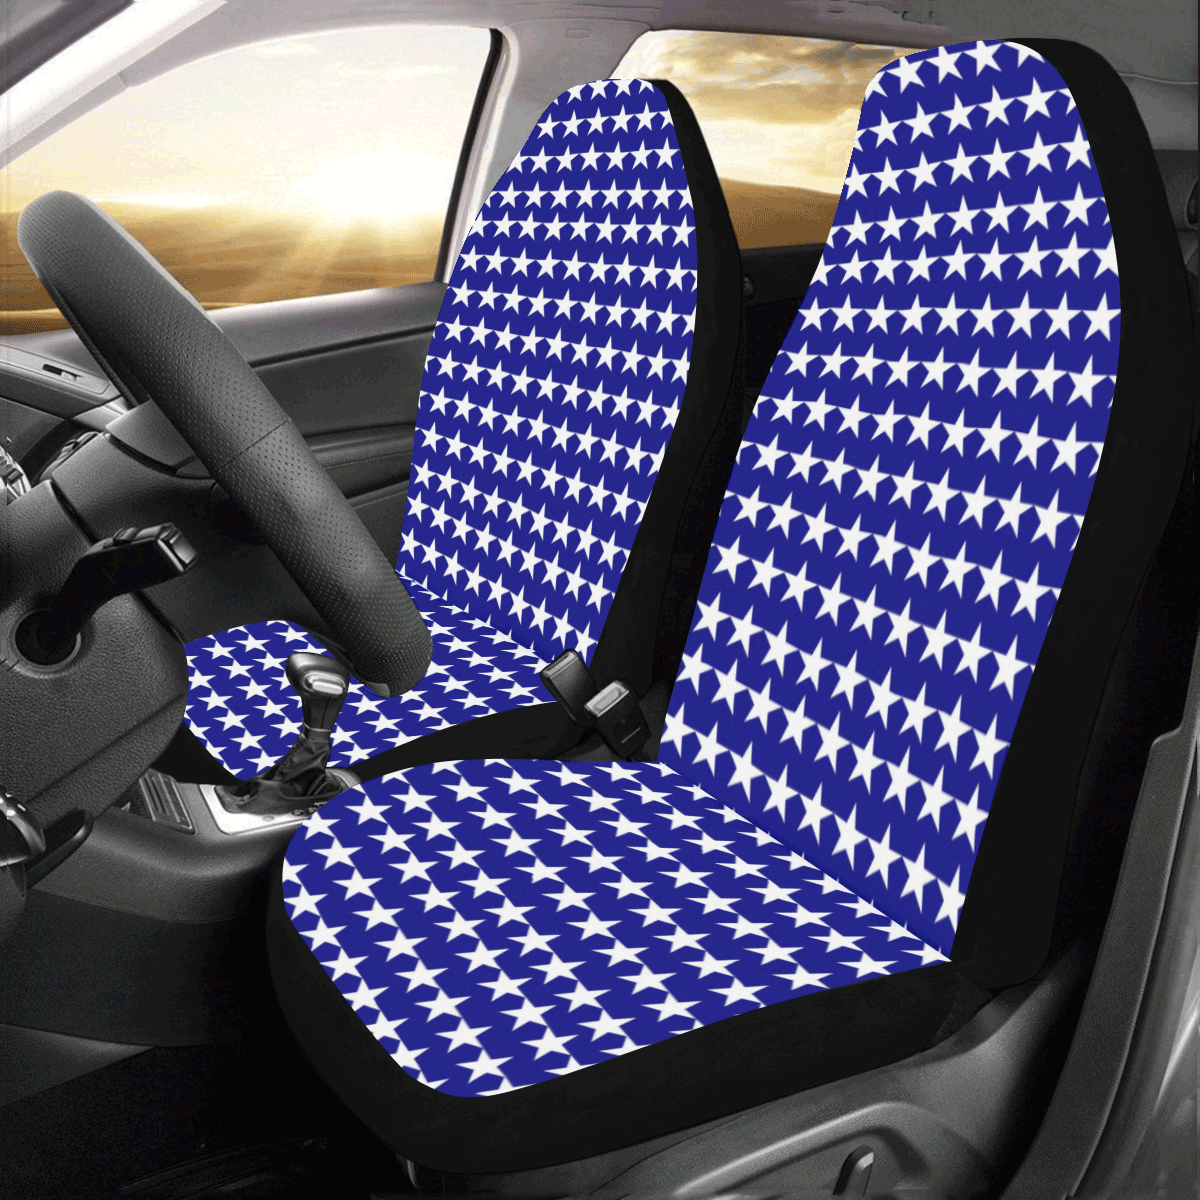 Blue with Stars Car Seat Covers (Set of 2)